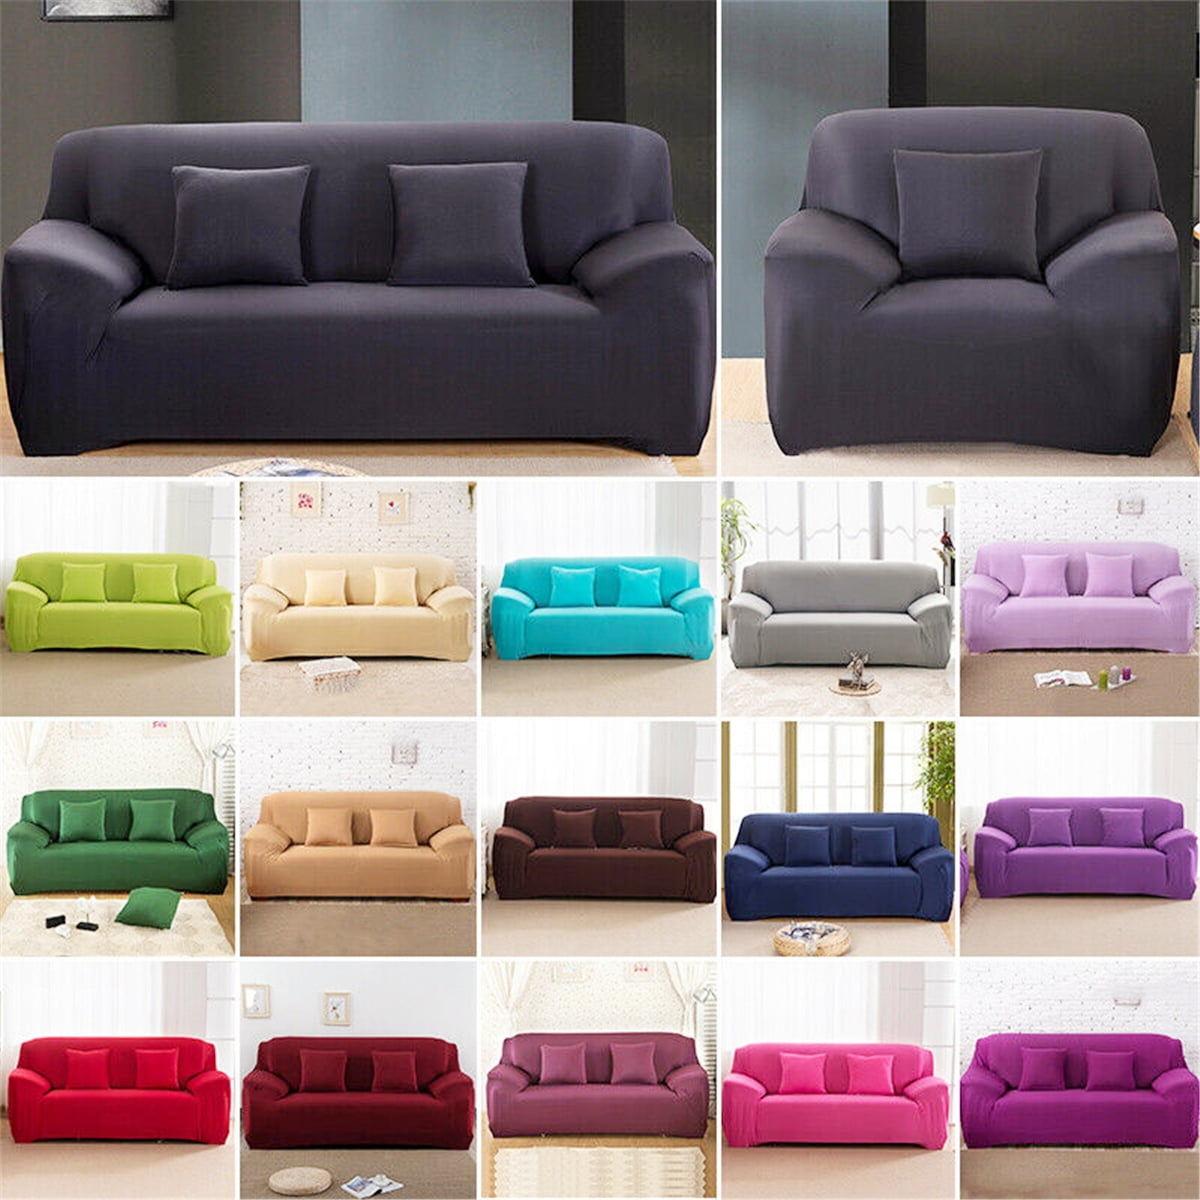 Anti-slip Soft Fabric 1-4 Sofa Slipcover Couch Cover Stretch Case US Hot Sales 